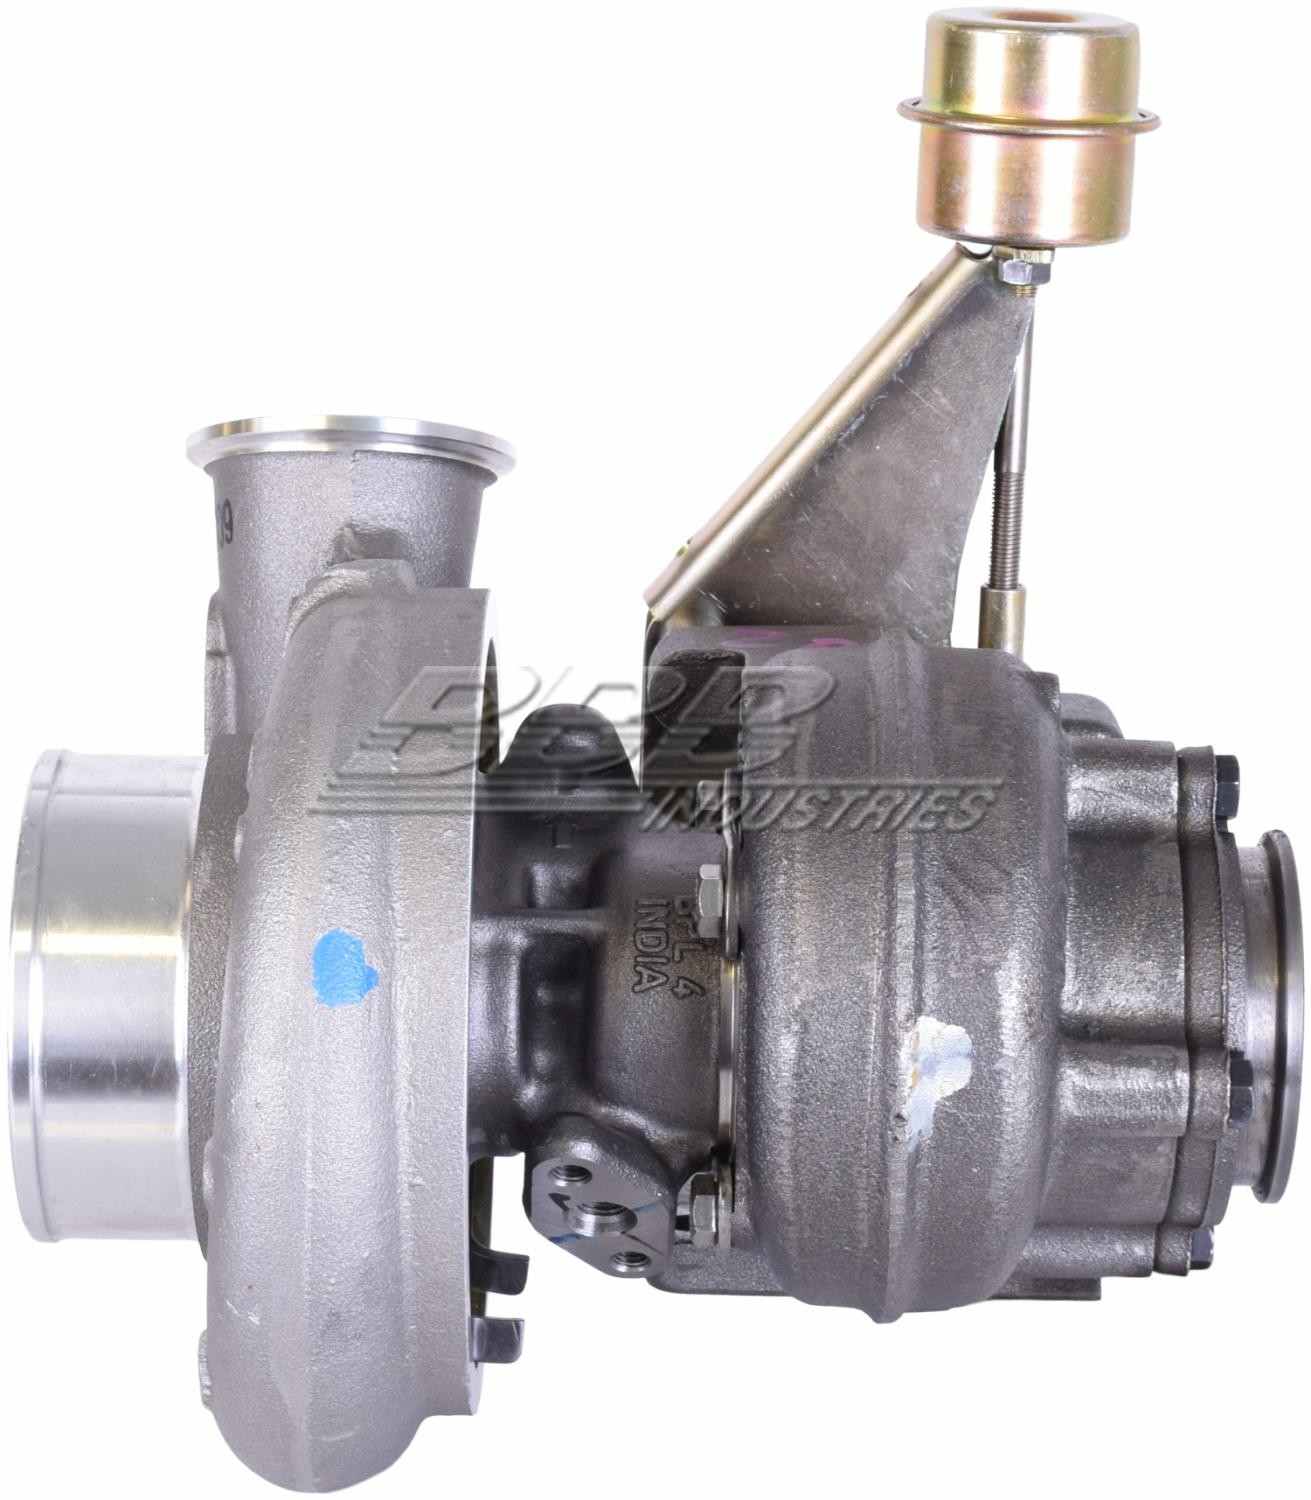 OE-TurboPower Remanufactured Turbocharger  top view frsport D2012